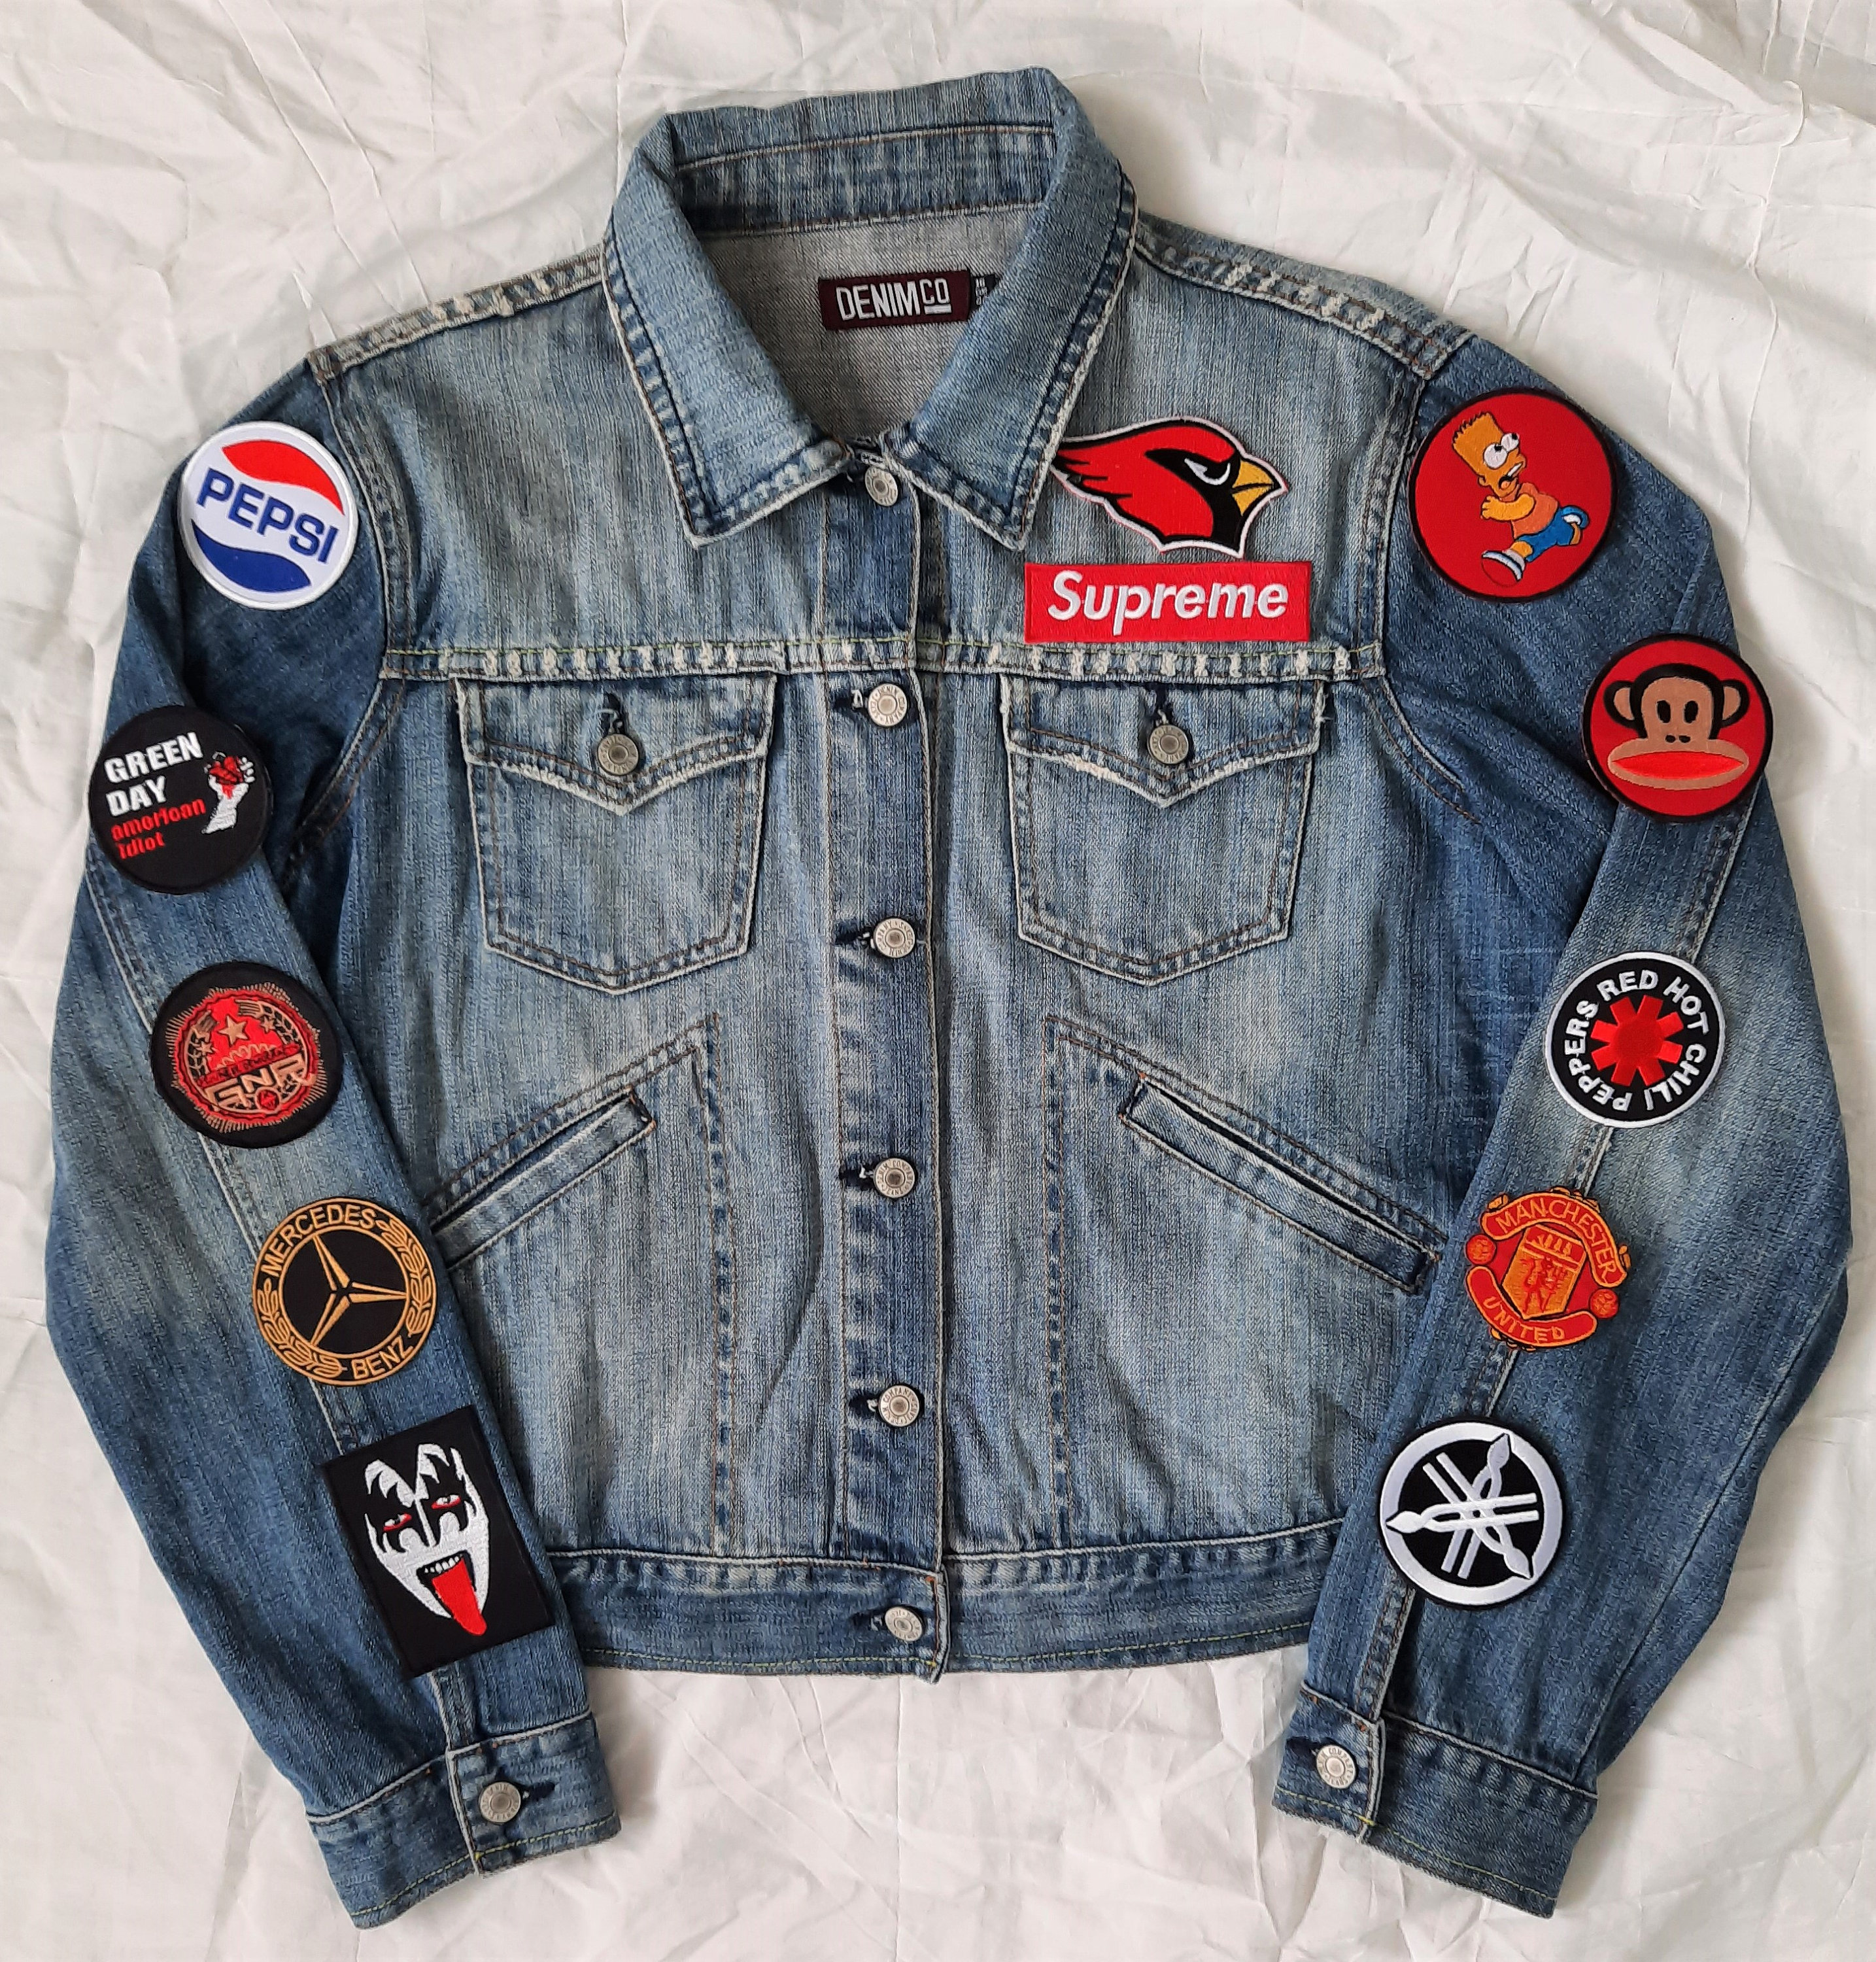 Upcycled Jean Jacket With Patches / Reworked Vintage Jean 